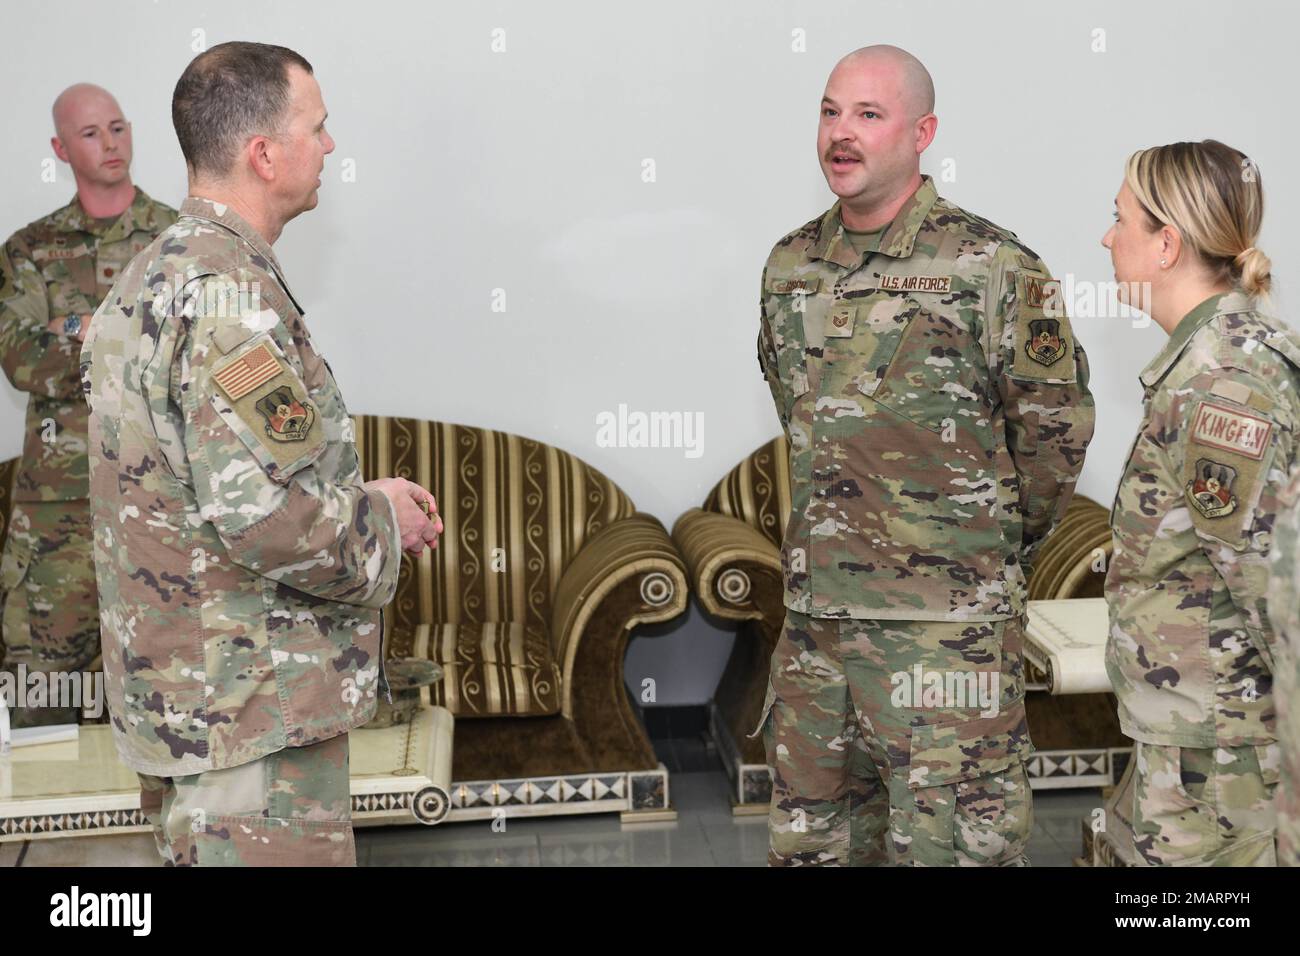 Technical Sgt. Daniel Gisch, a radar technician assigned to the 727th Expeditionary Air Control Squadron, also known as “Kingpin”, meets with Lt. Gen. Gregory M. Guillot, the Ninth Air Force (Air Forces Central) commander June 3, 2022 at Al Dhafra Air Base, United Arab Emirates. Gisch was recognized for discovering a fault in the radar system, which resulted in saving the U.S. Air Force more than $2 million dollars in parts and repairs. Stock Photo